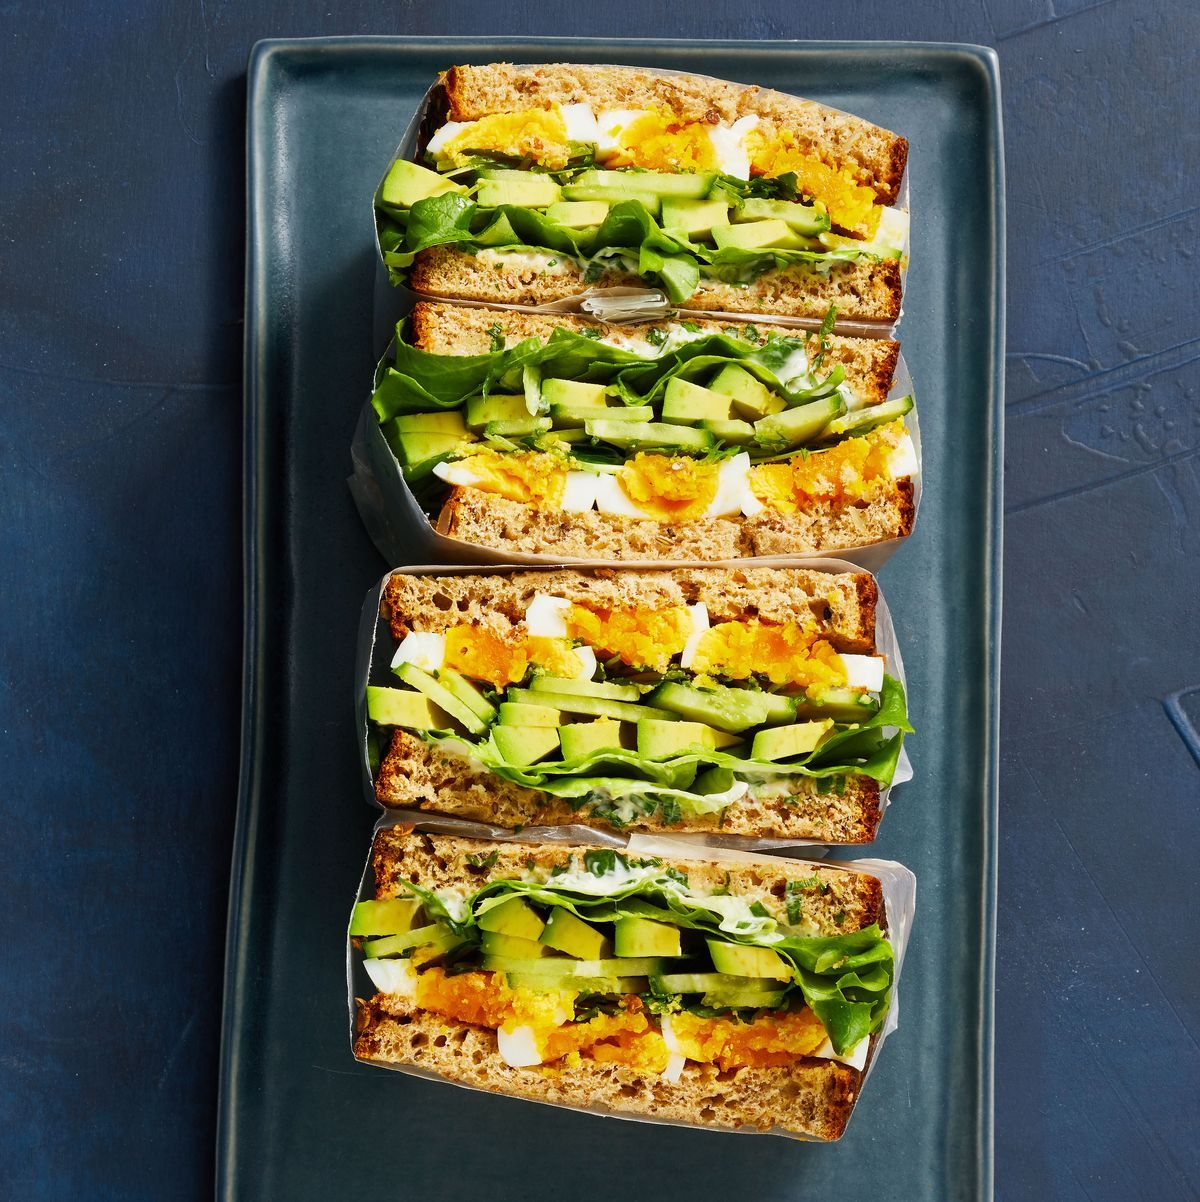 Here’s How to Make a Healthy and Seriously Filling Sandwich